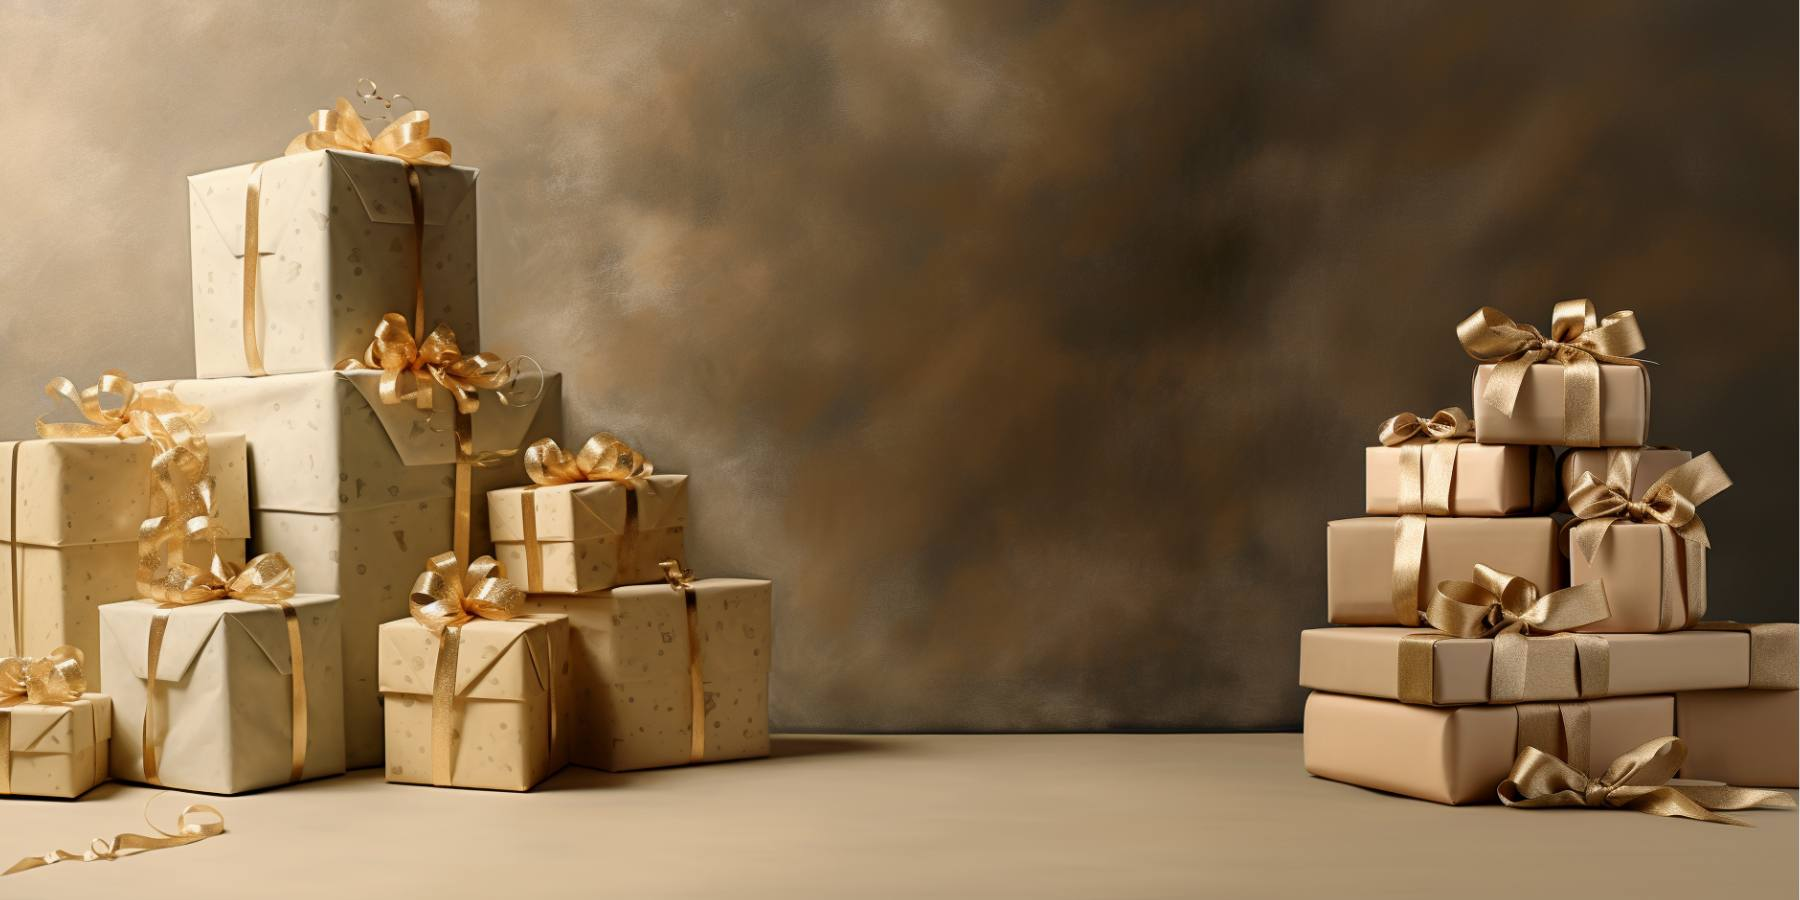 Background image with gifts from Hotel Chocolat USA | Velvetiser 